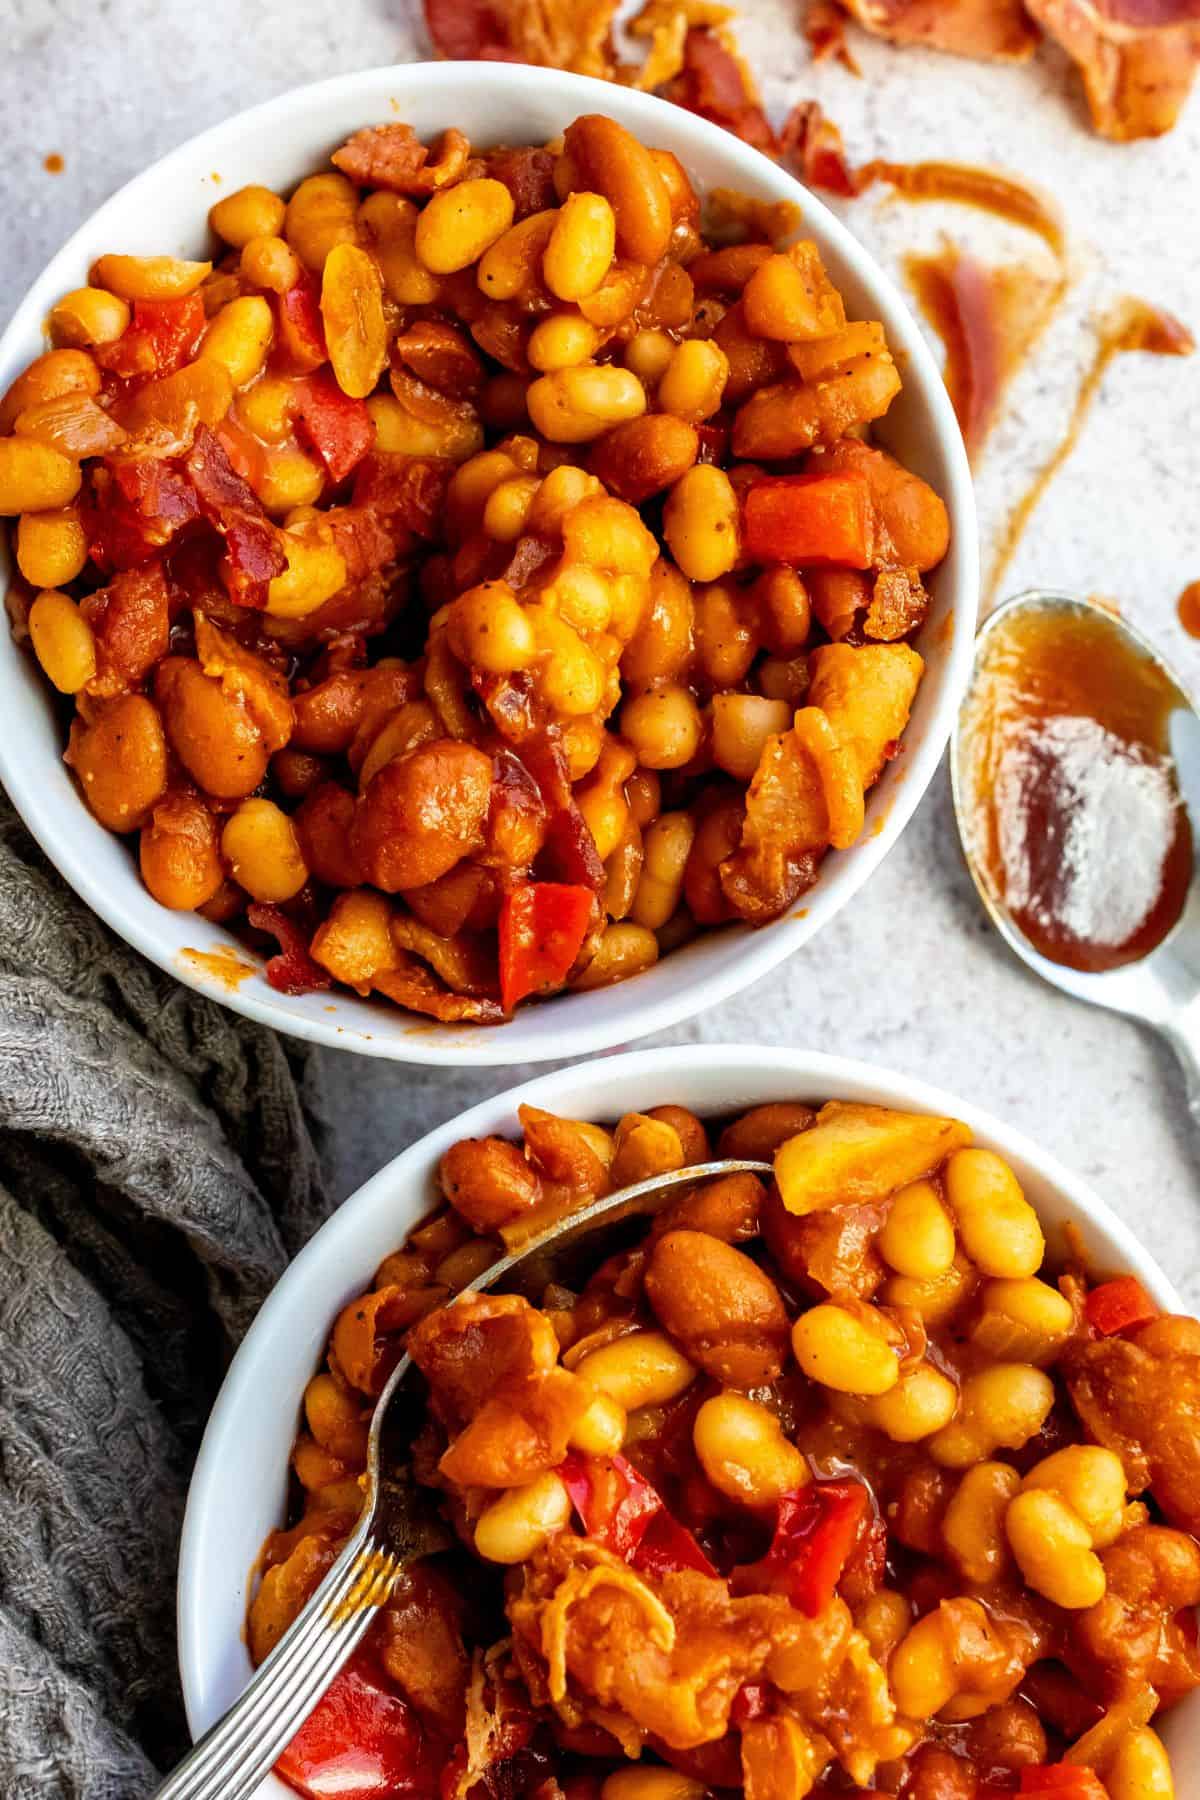 An overhead image of two bowls filled with baked beans.